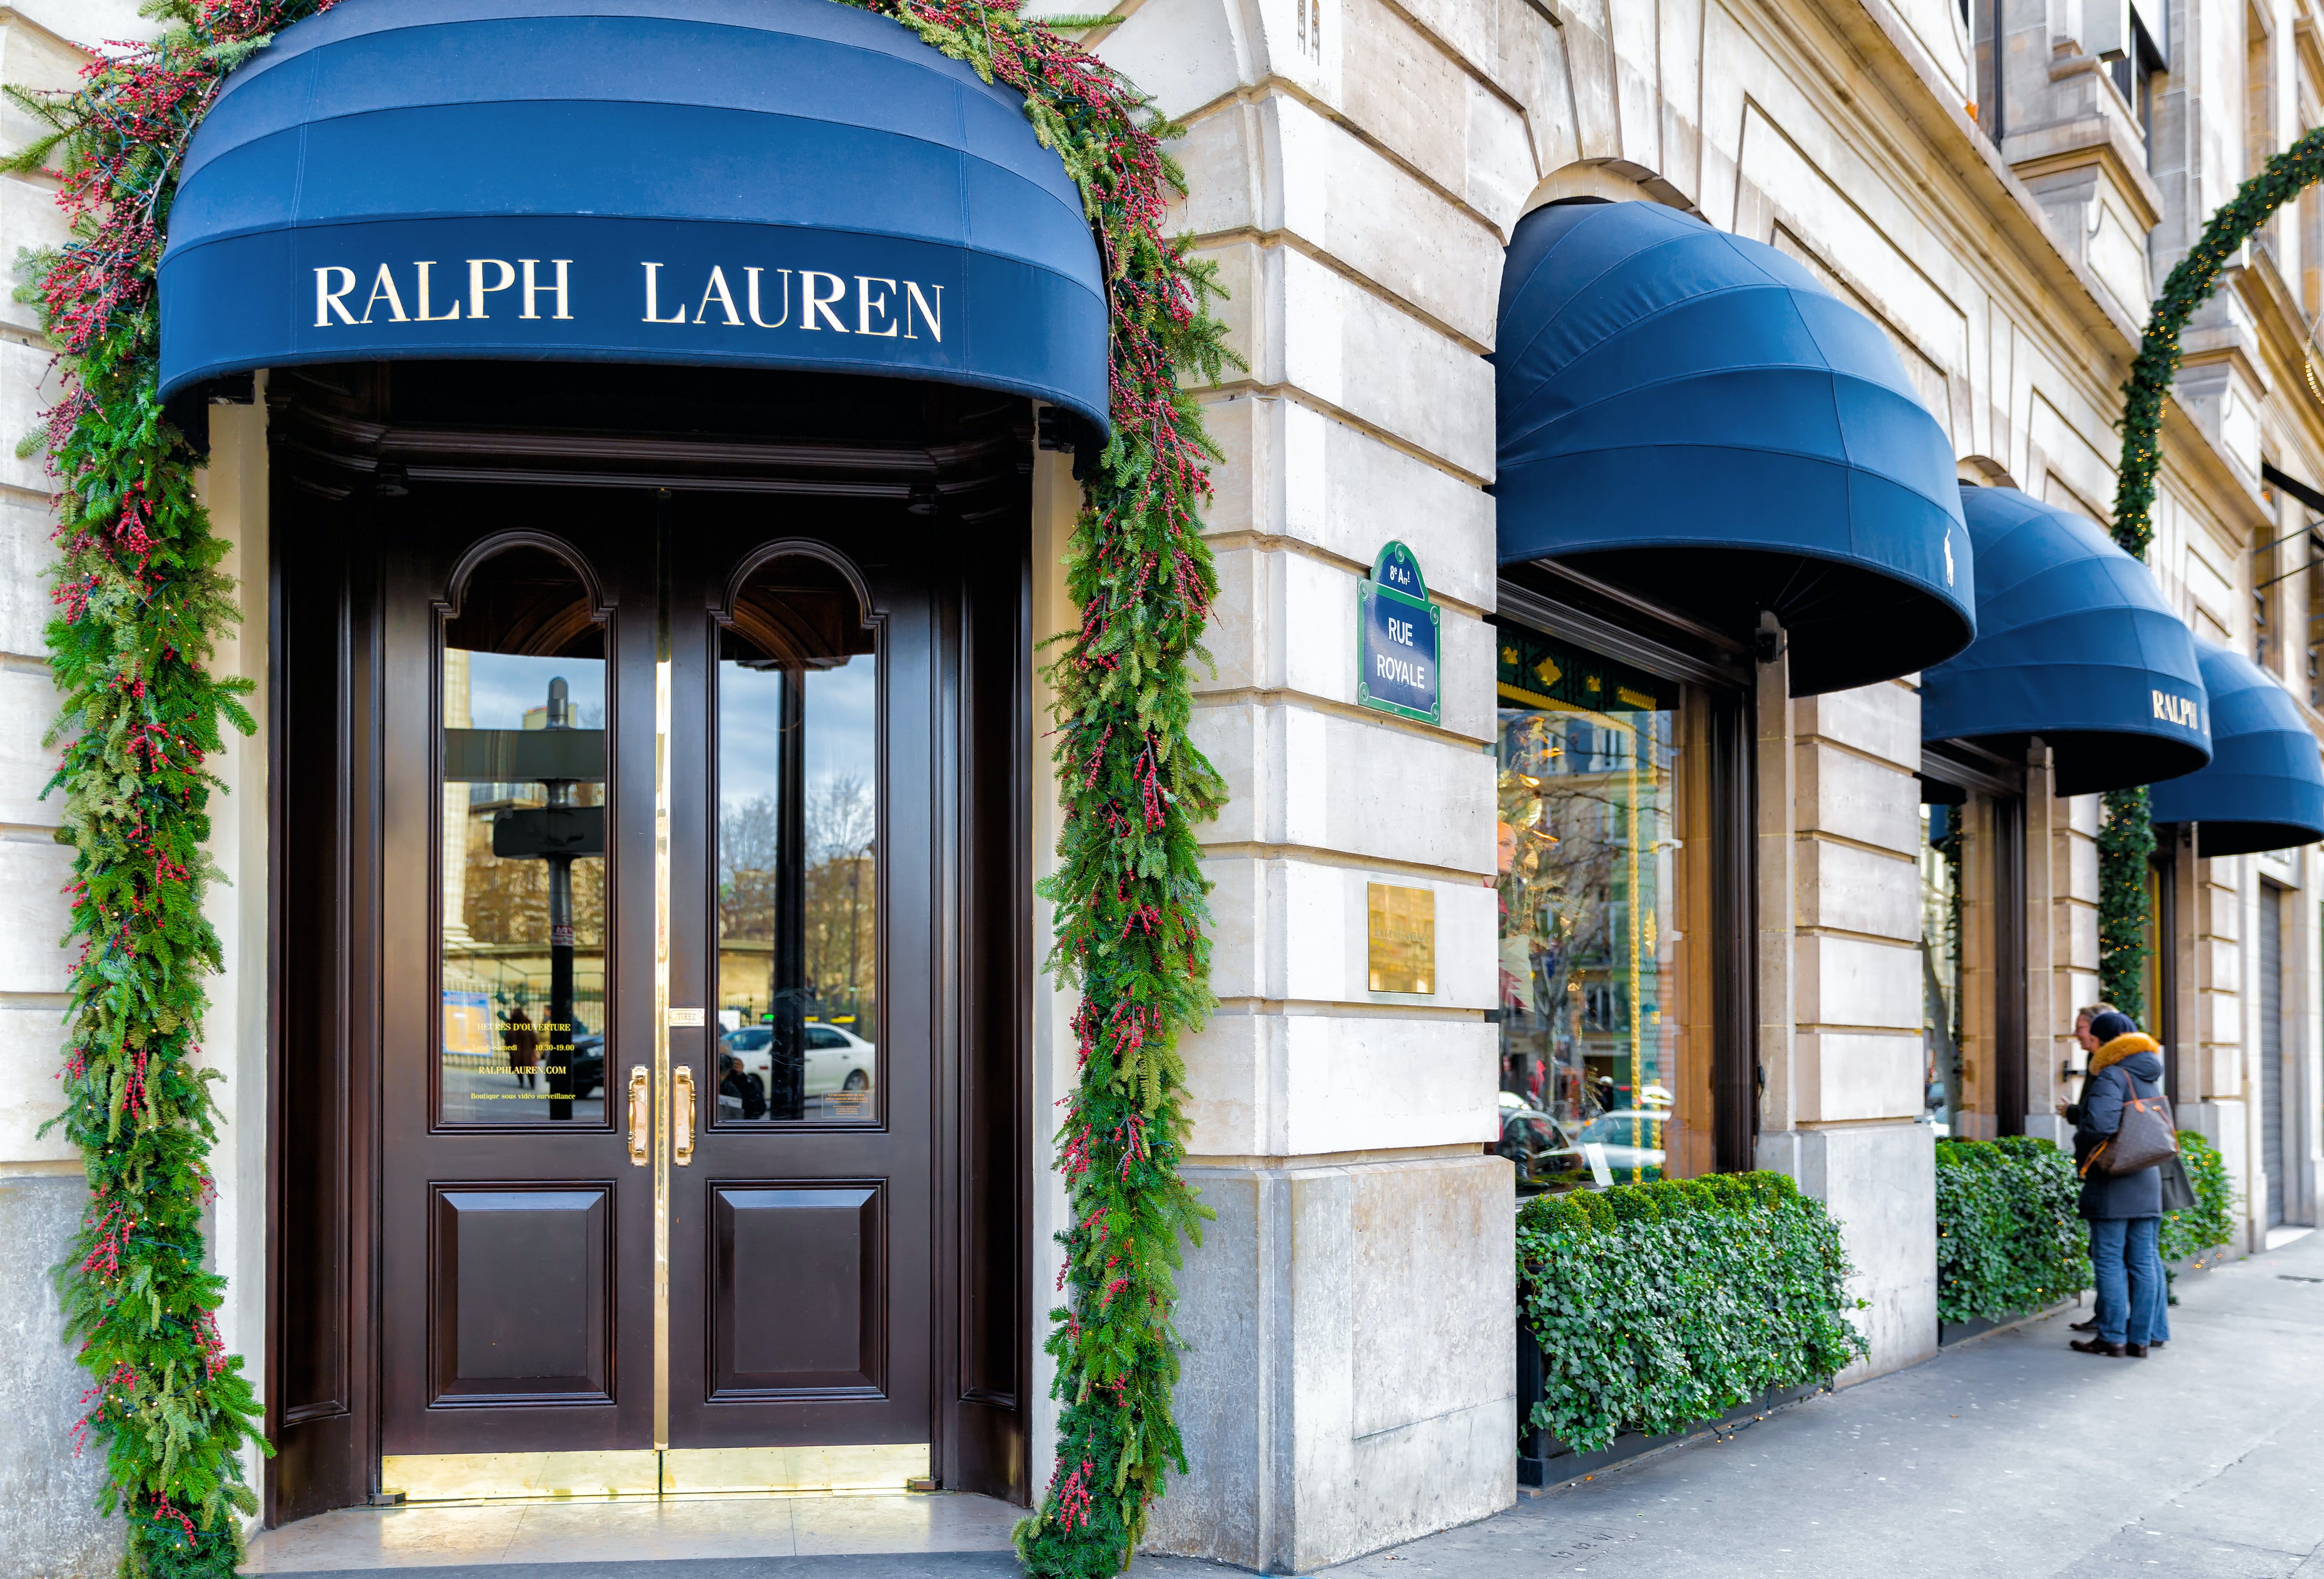 Why Is The Online Market Place The Next Big Thing For Ralph Lauren